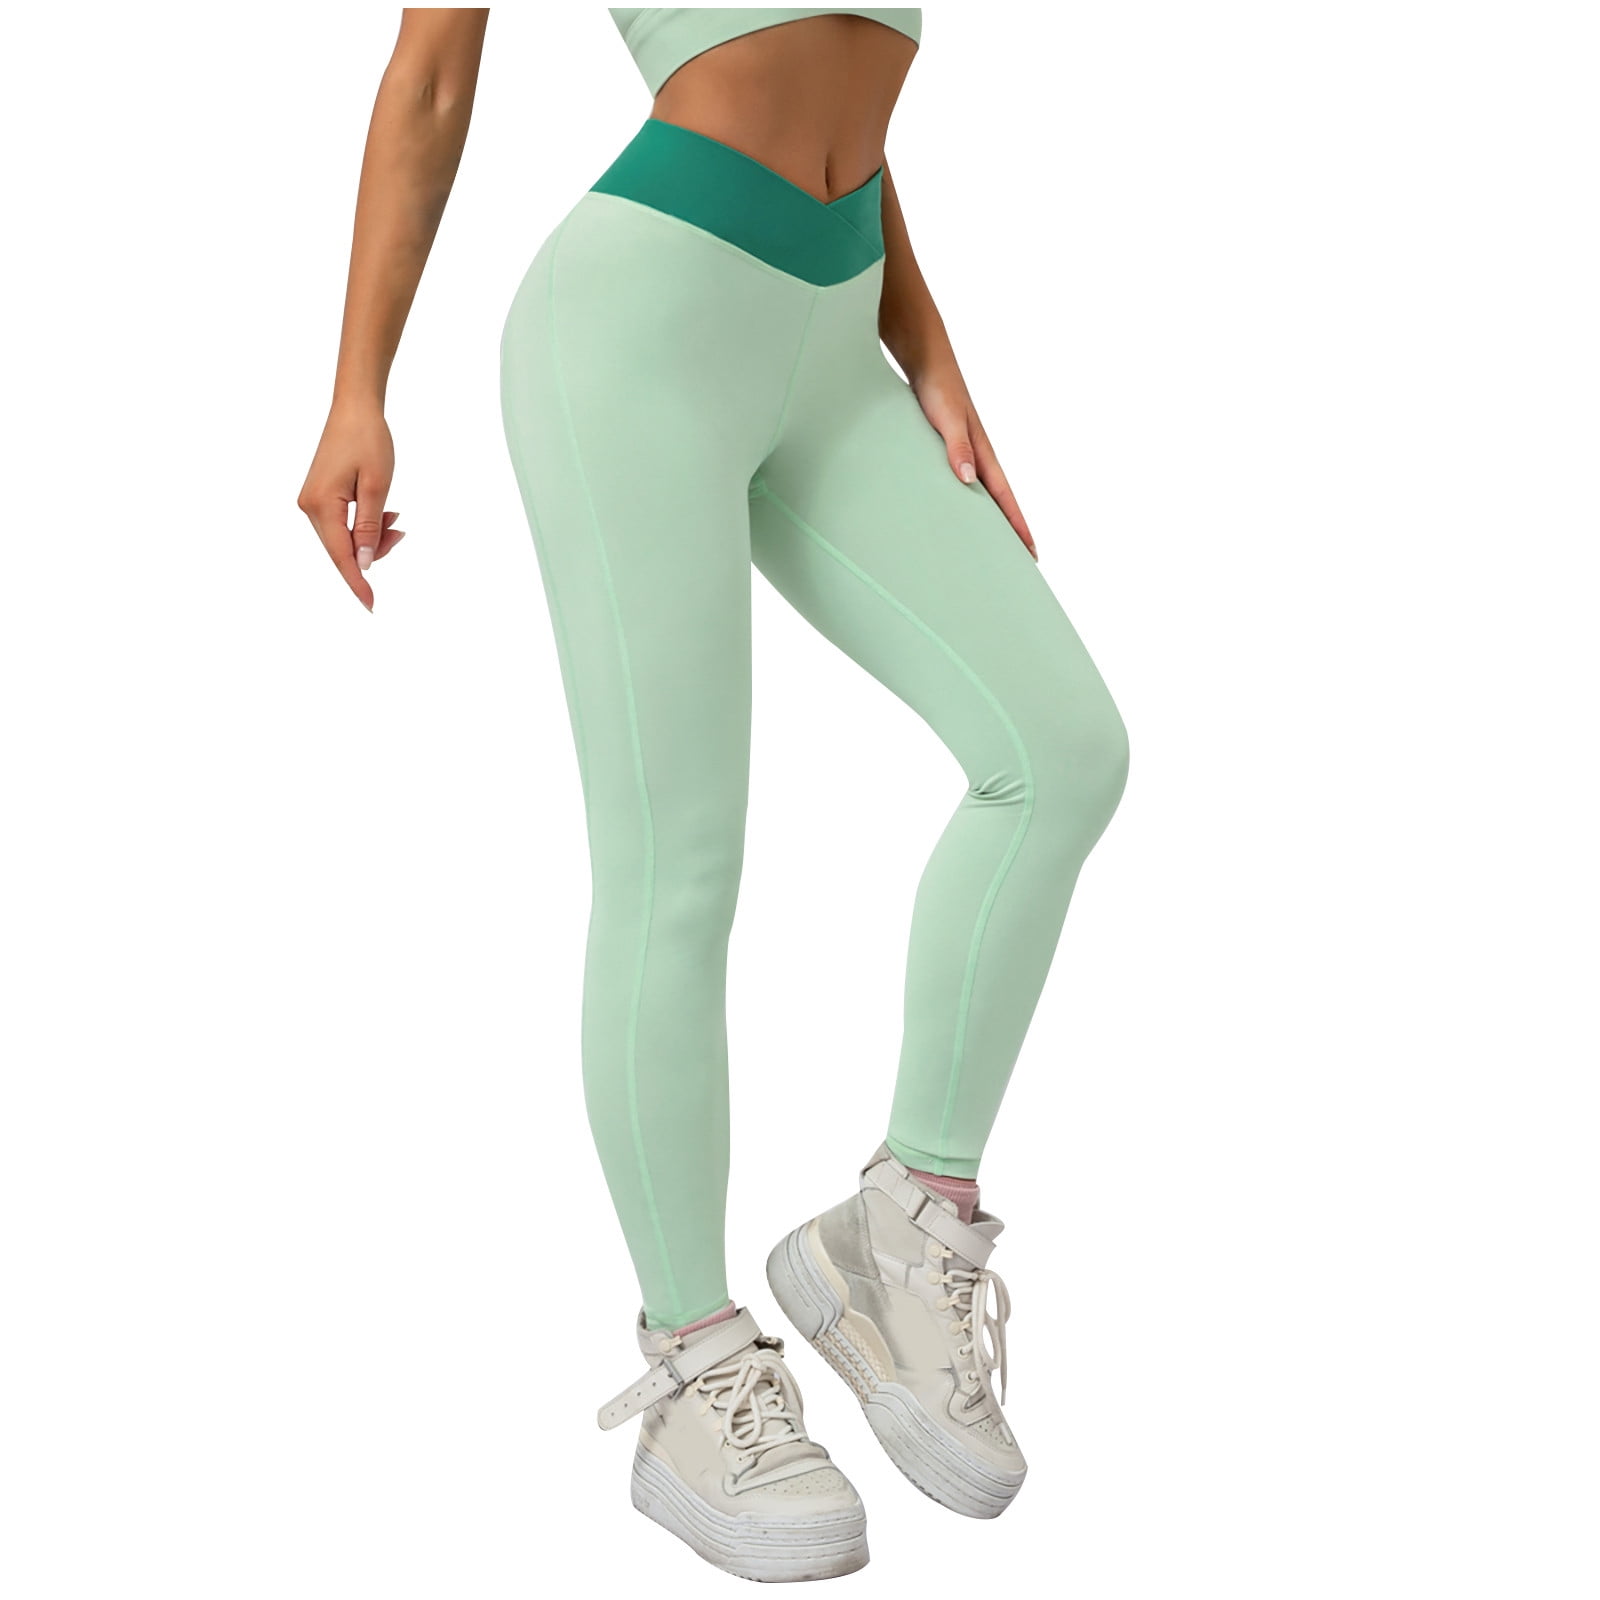 Workout Leggings for Women Bowtie High Waist Yoga Pants Stretch Fitness Athletic  Compression Tights Ladies Clothes 